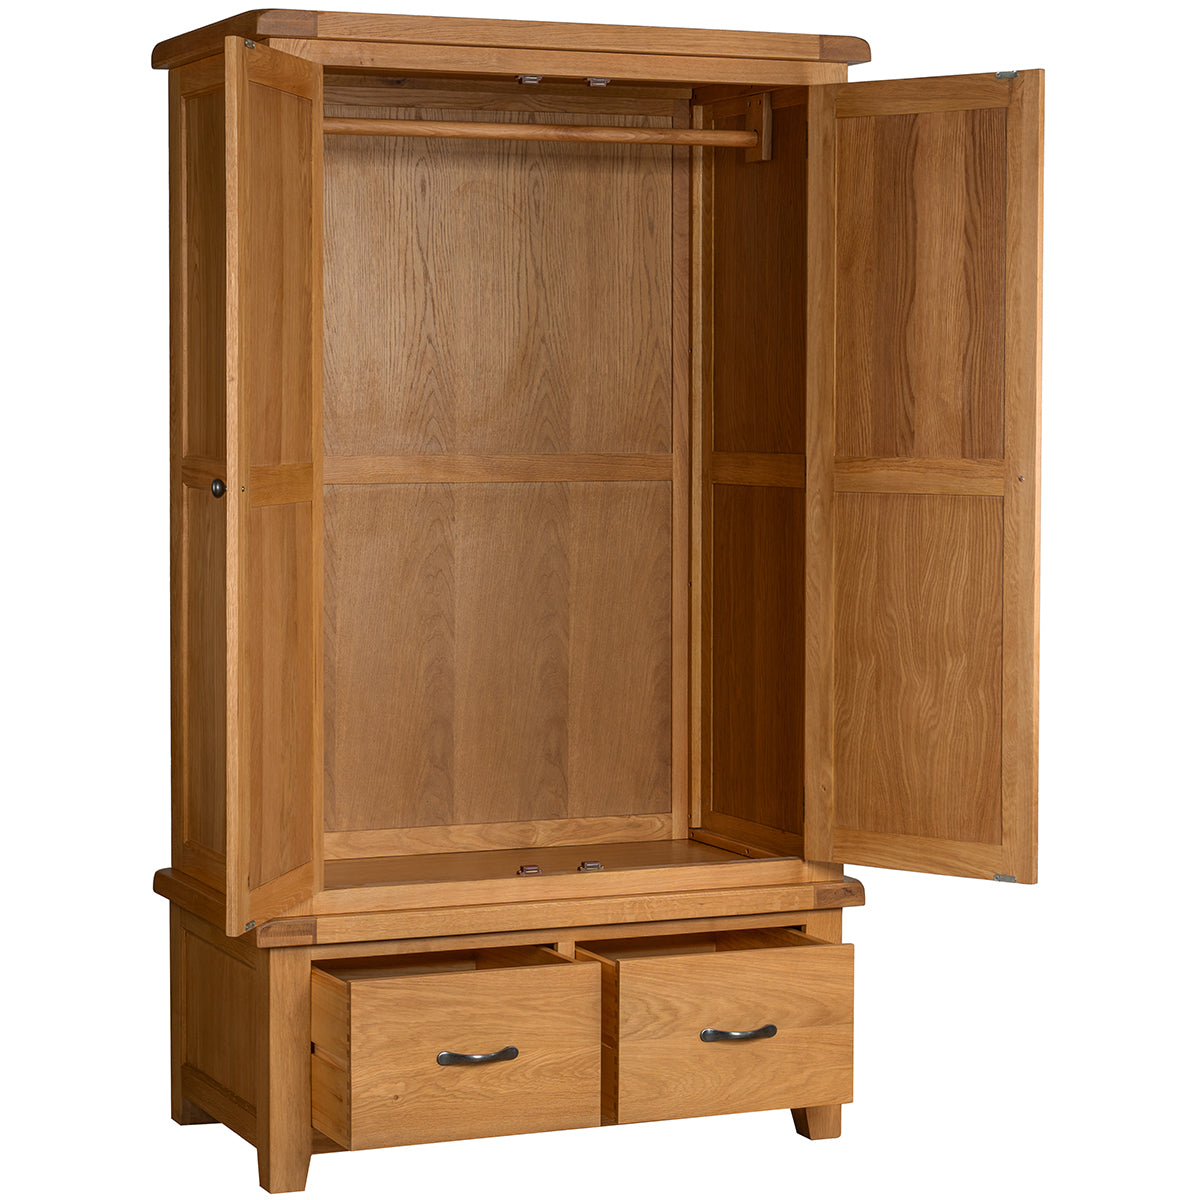 a wooden cabinet with a wooden door in it 